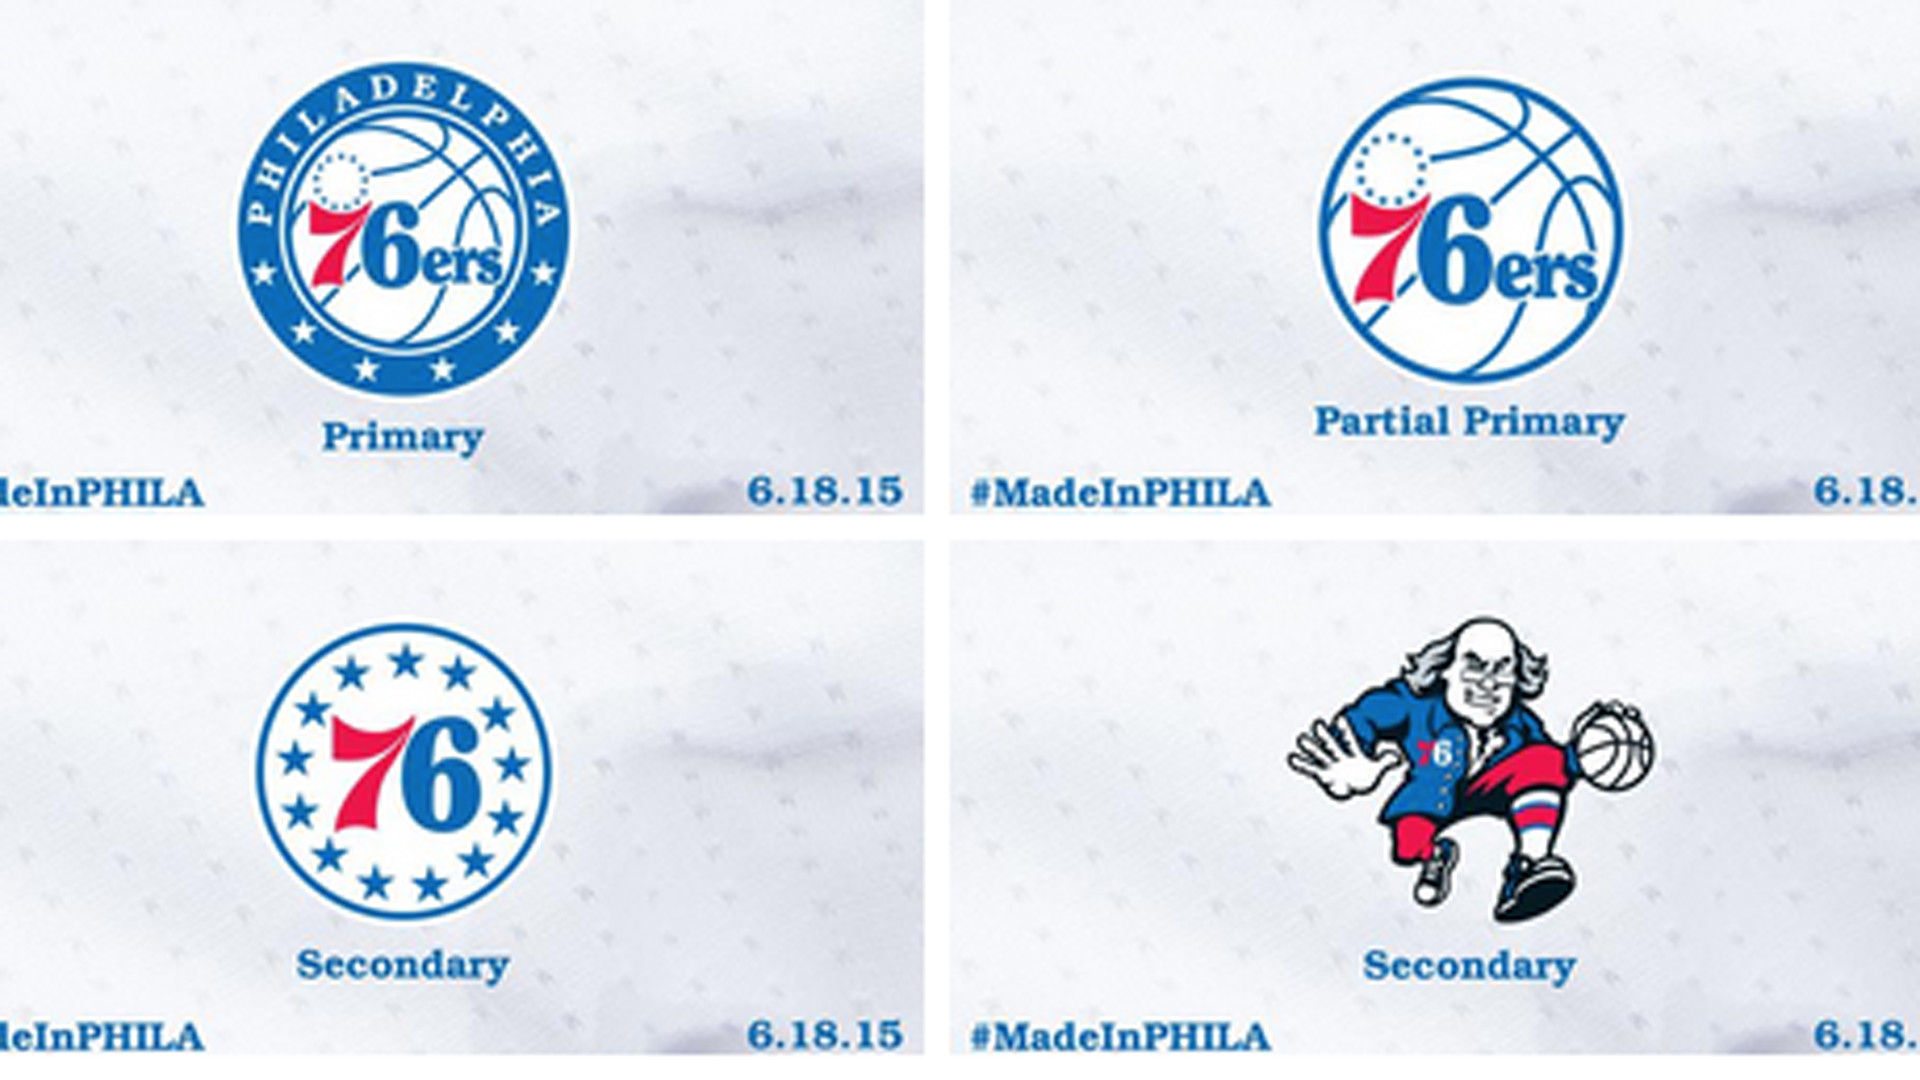 1920x1080 The 76ers new logo — round, starry, red, white and blue | NBA | Sporting  News